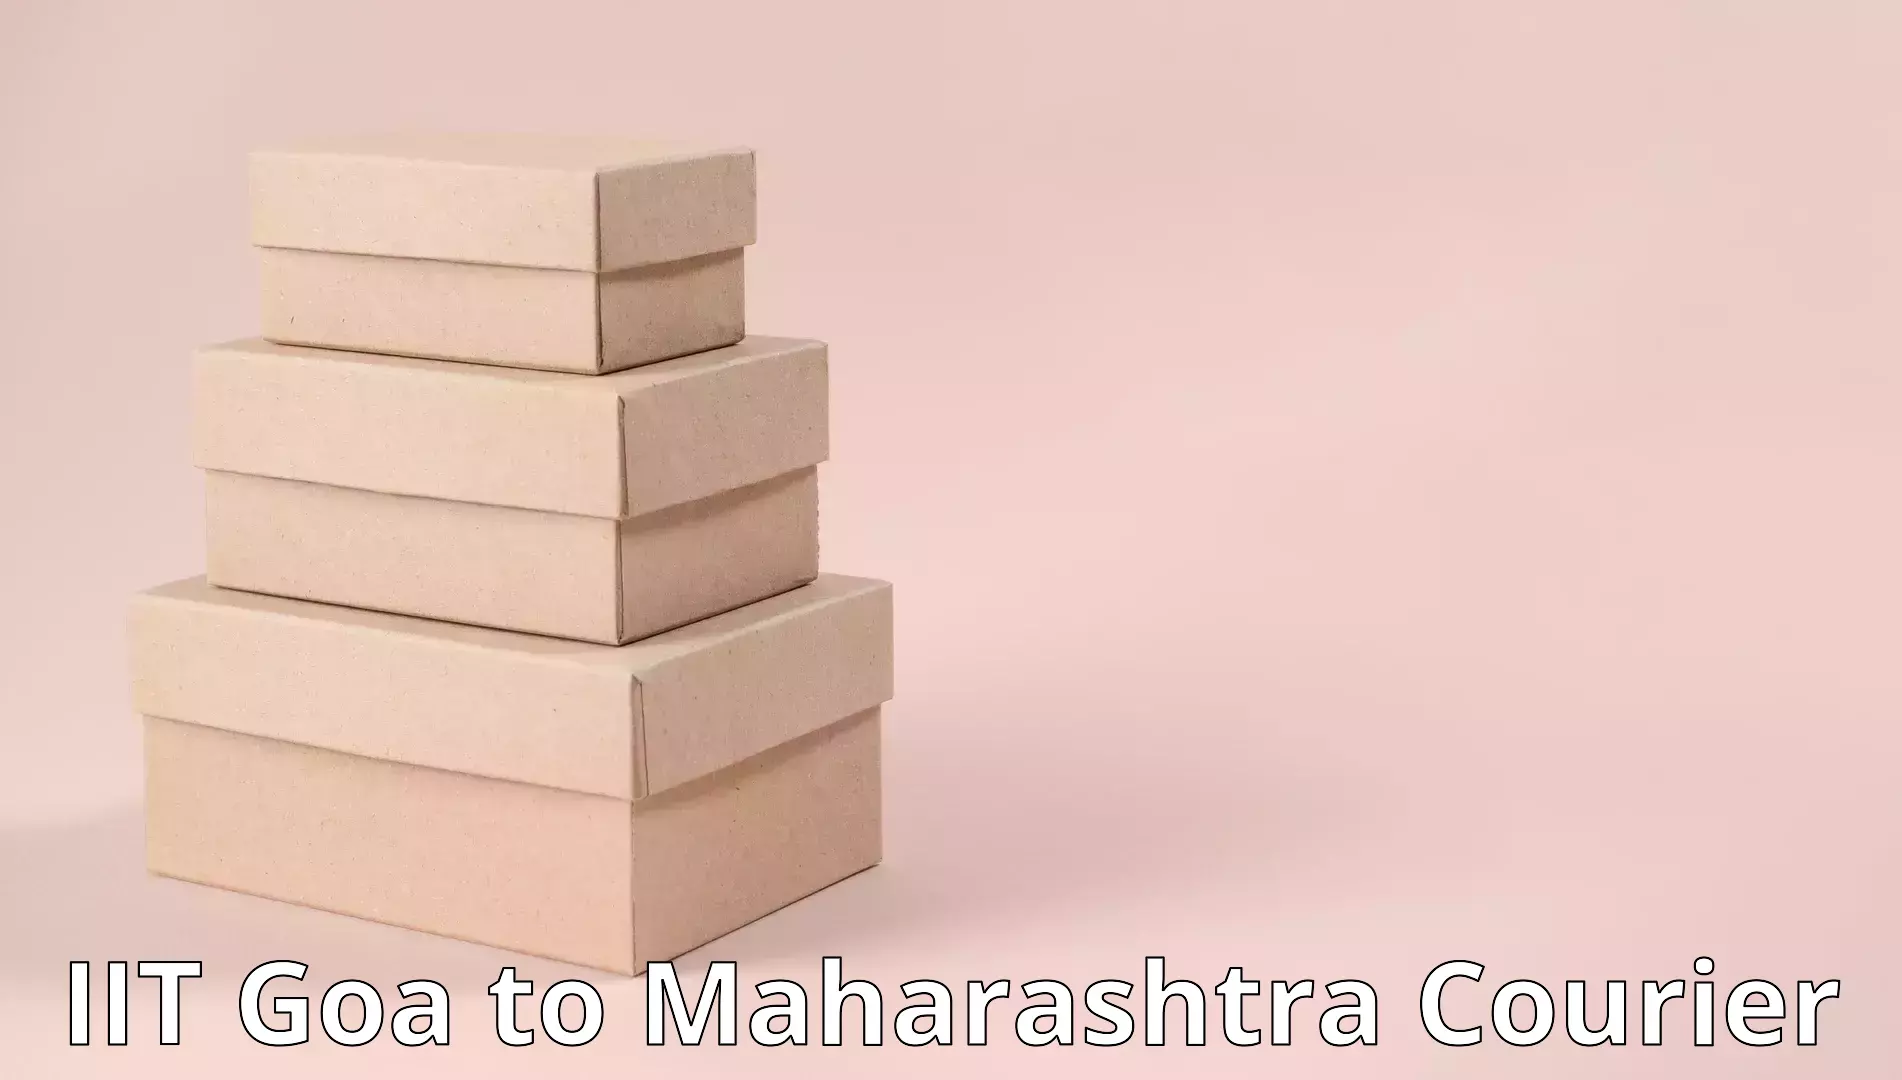 Professional moving assistance in IIT Goa to Maharashtra